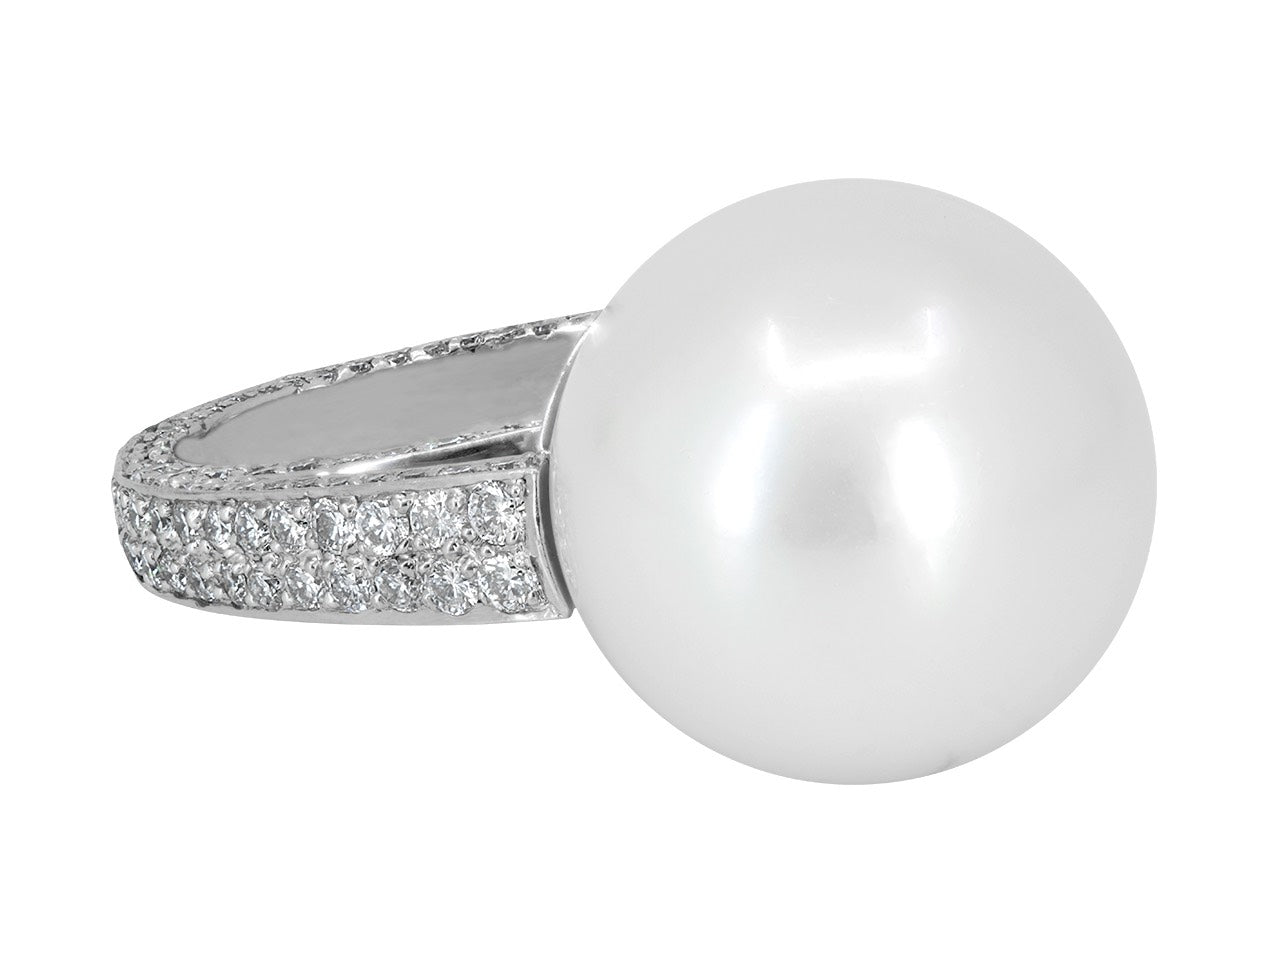 Set of South Sea Pearl and Diamond Ring and Earrings in 18K White Gold and Platinum